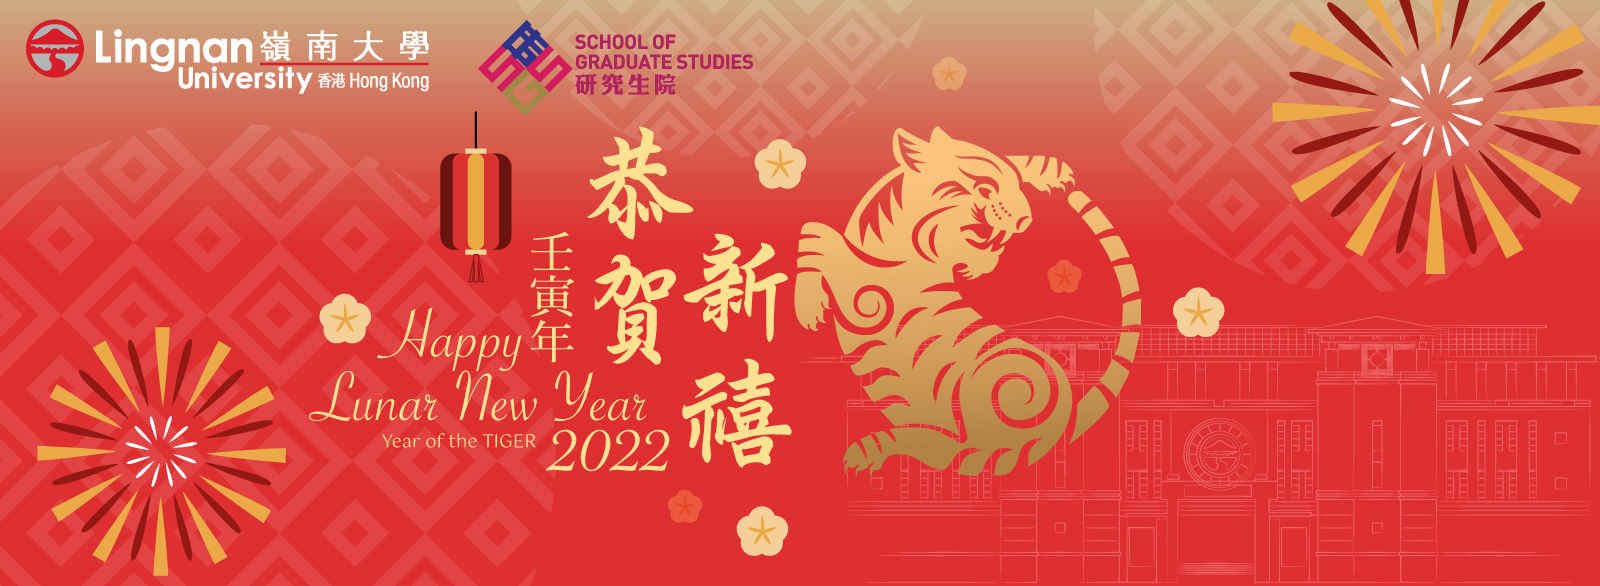 Wishing you a Happy, Healthy and Prosperous Year of the Tiger